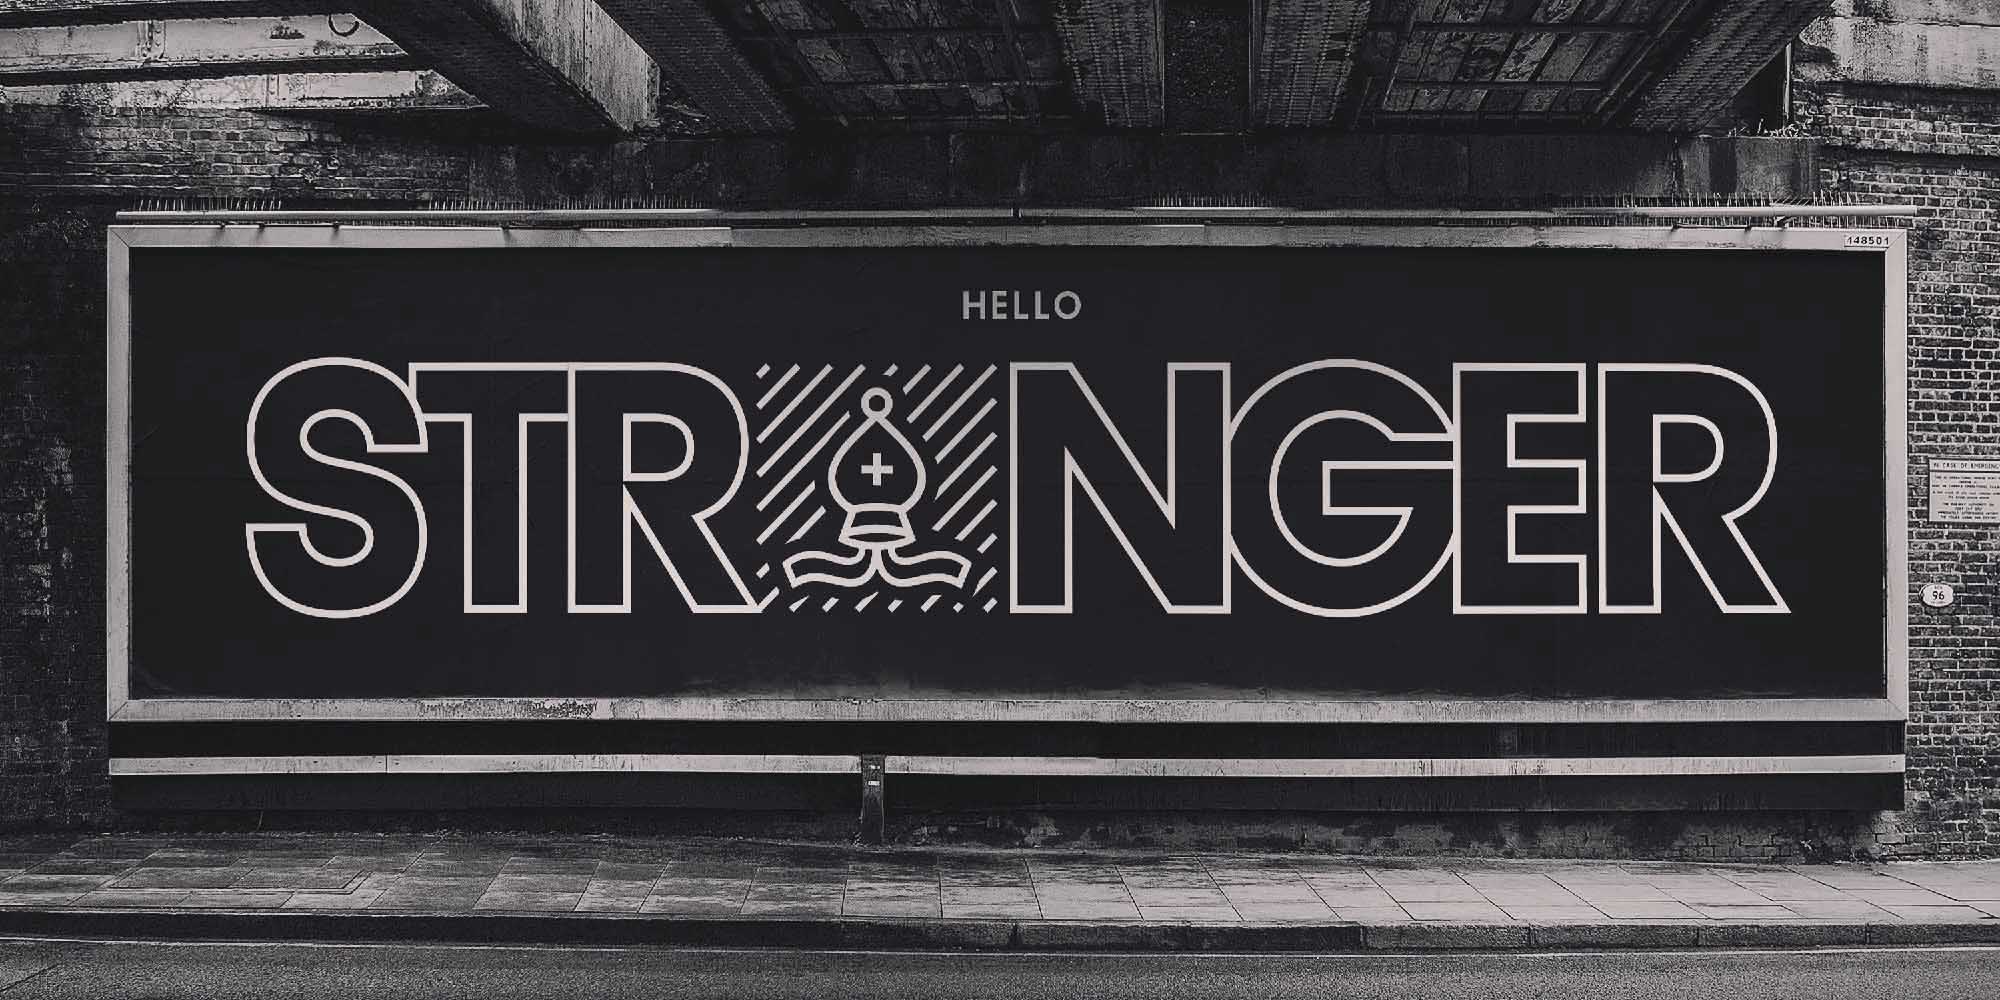 A picture of a large street advertisement: Hello Stranger